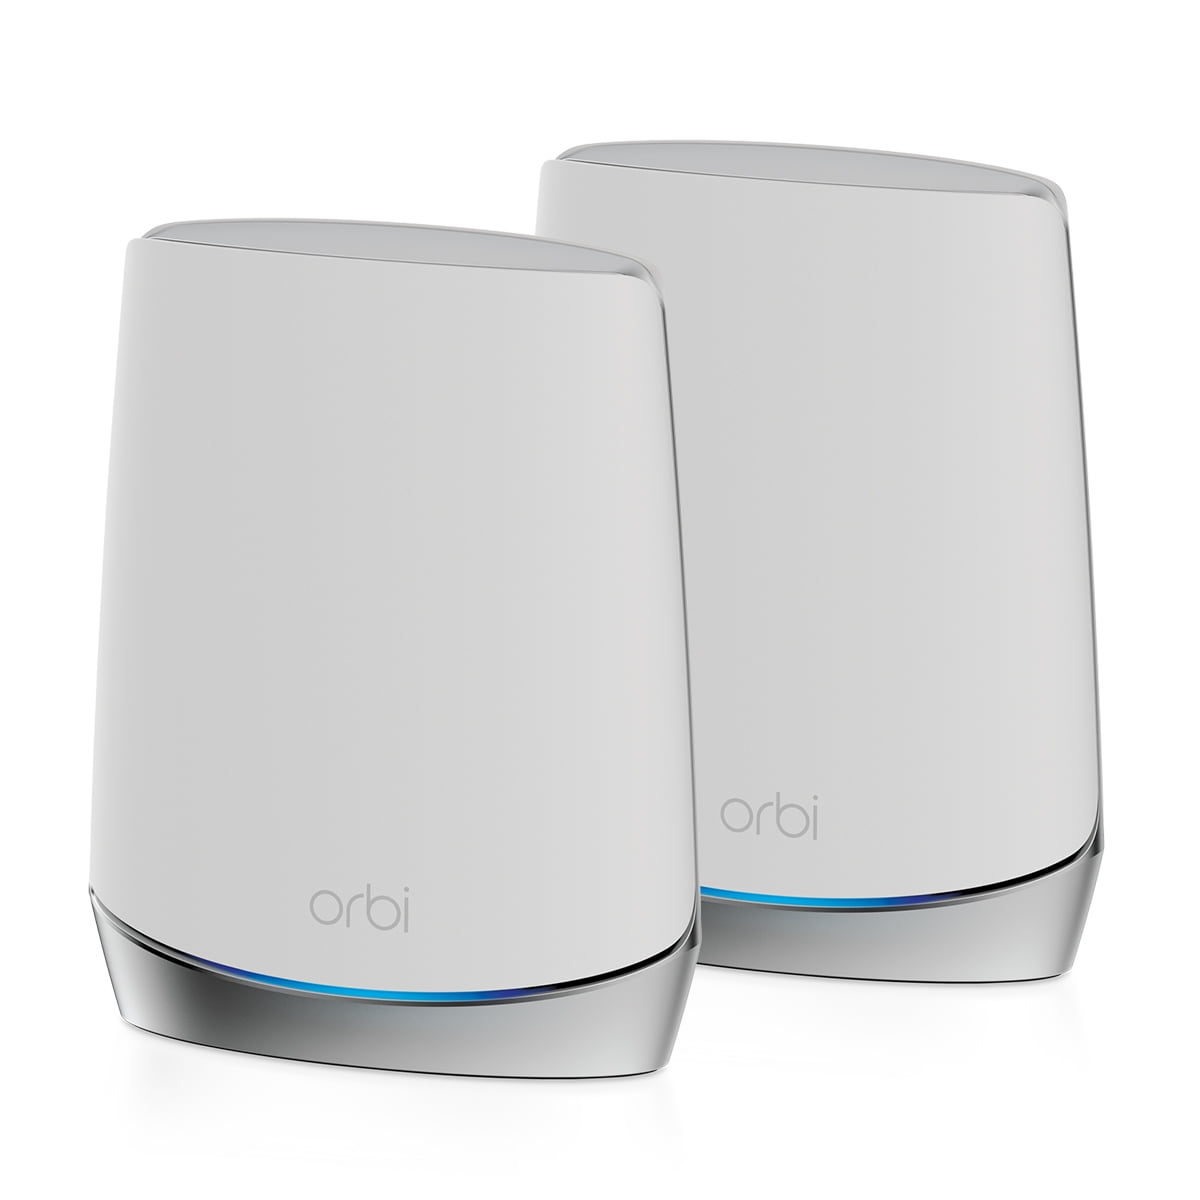 NETGEAR - Orbi AX4200 Tri-Band Mesh WiFi 6 System with Router + 1